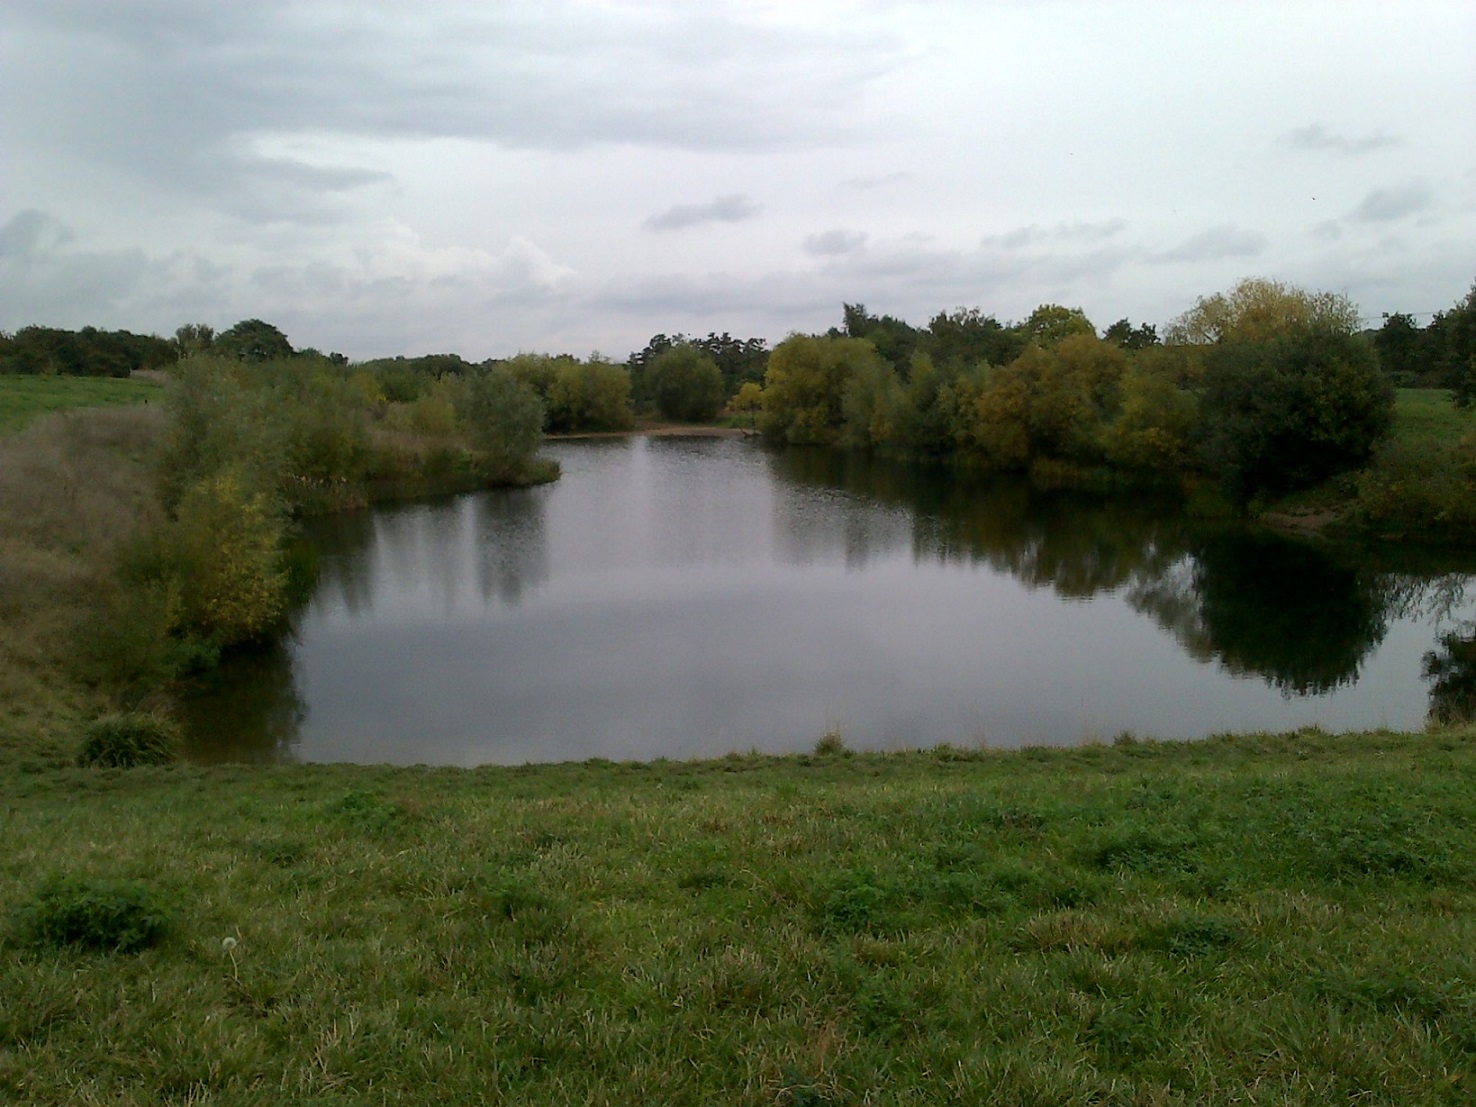 A small lake under a cloudy sky, surrounded mainly by trees and with a grassy bank in the foreground.